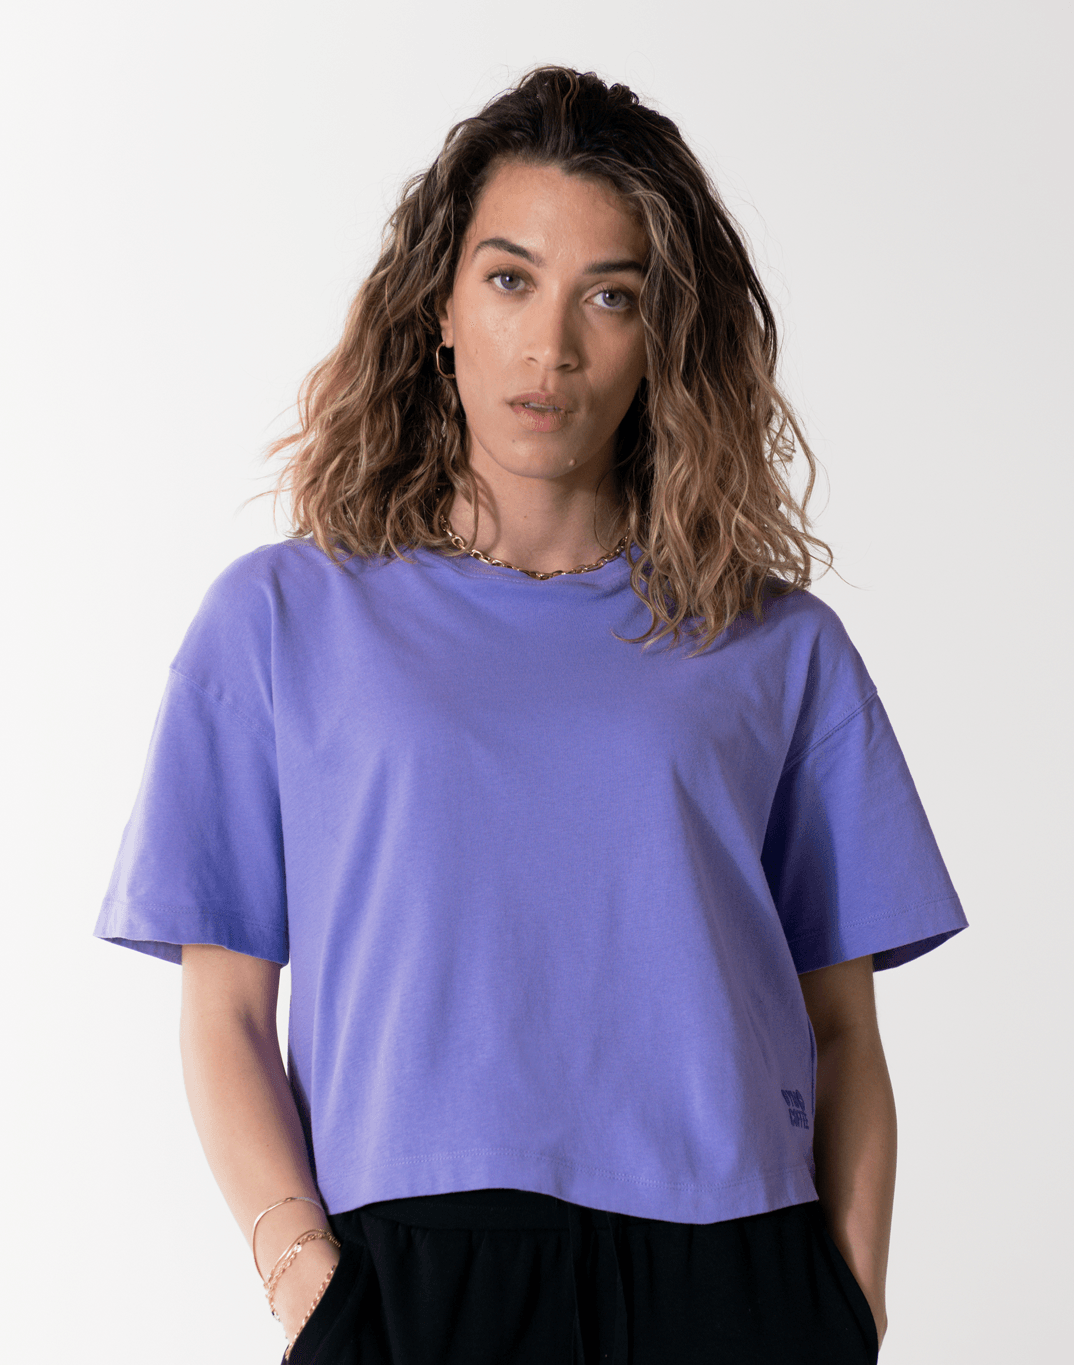 Kinney Tee in Lavender - T-Shirts - Gym+Coffee